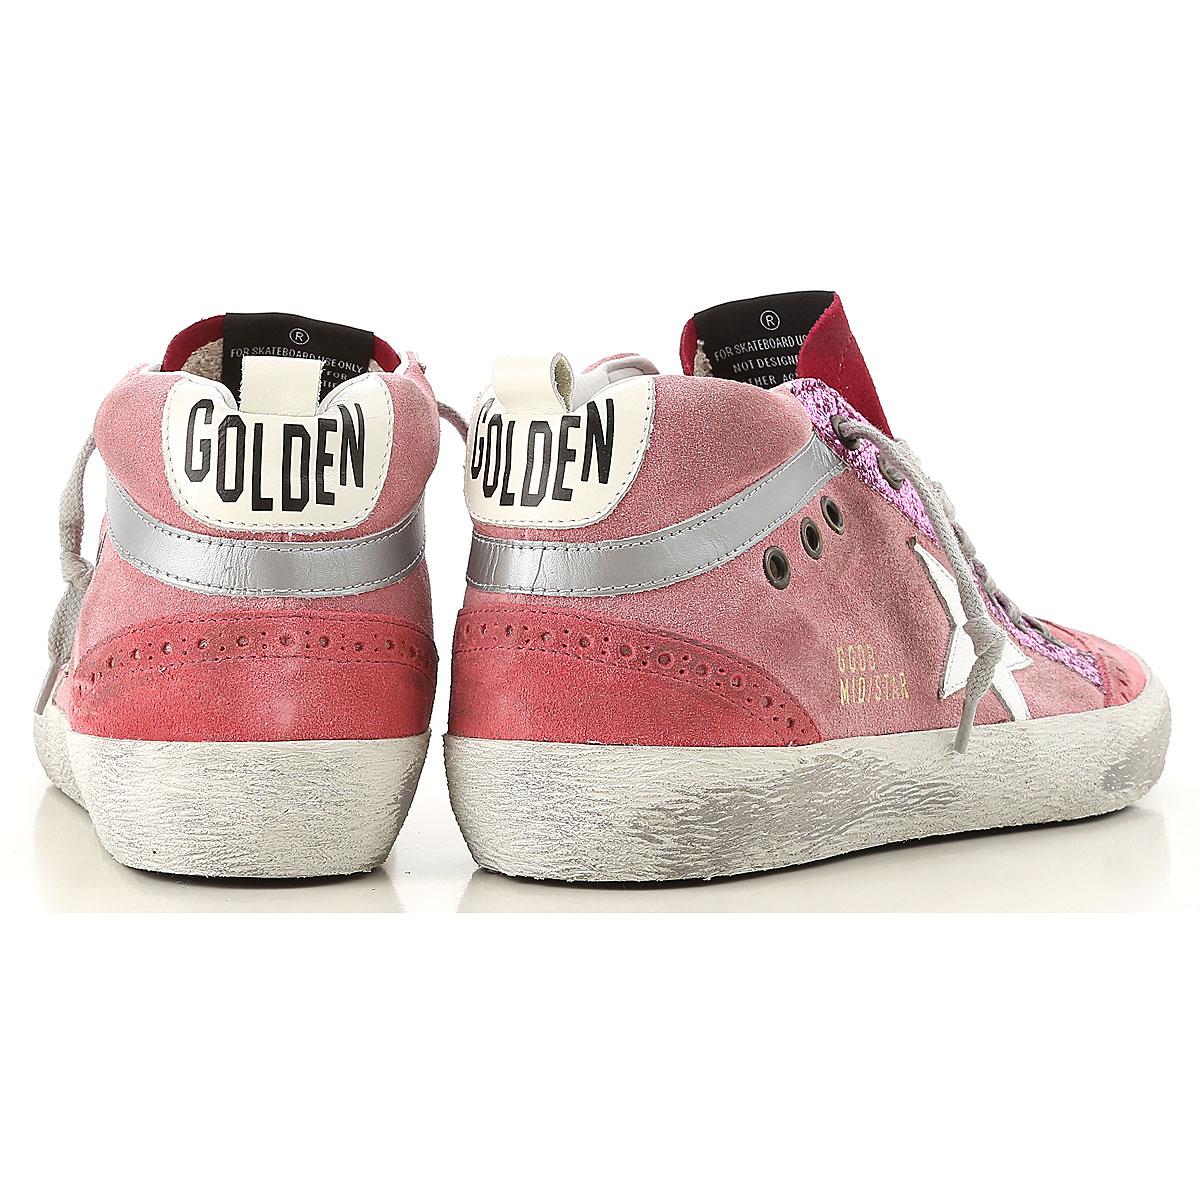 Golden Goose Deluxe Brand Leather Mid Star Sneakers in Pink/White (Pink ...